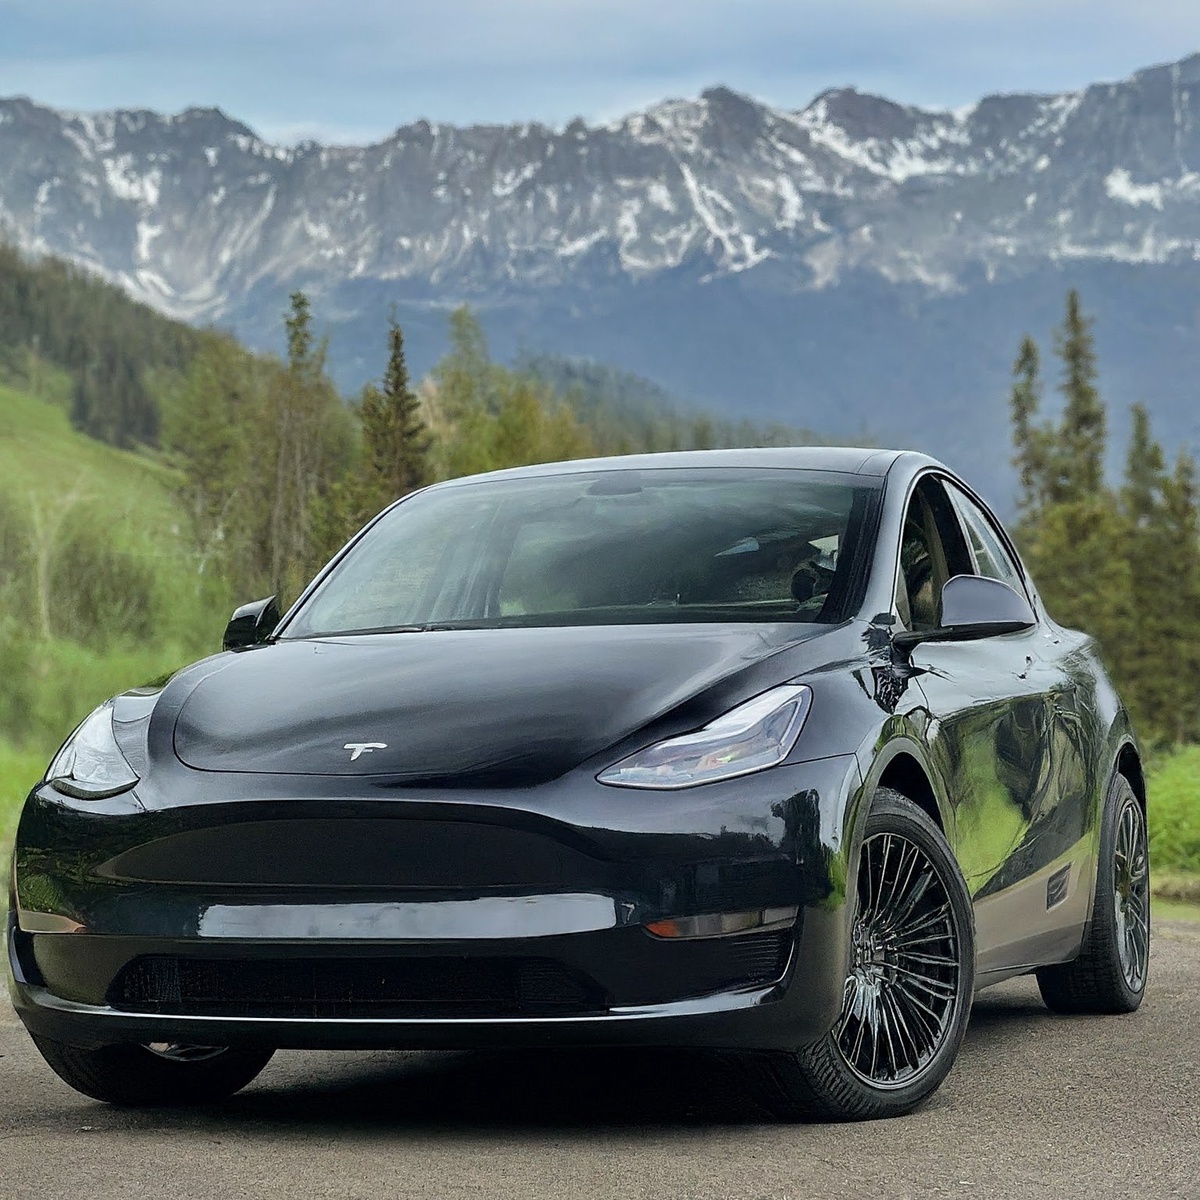 Book the most suitable Tesla Ppf Model Y for the protection of your car paint